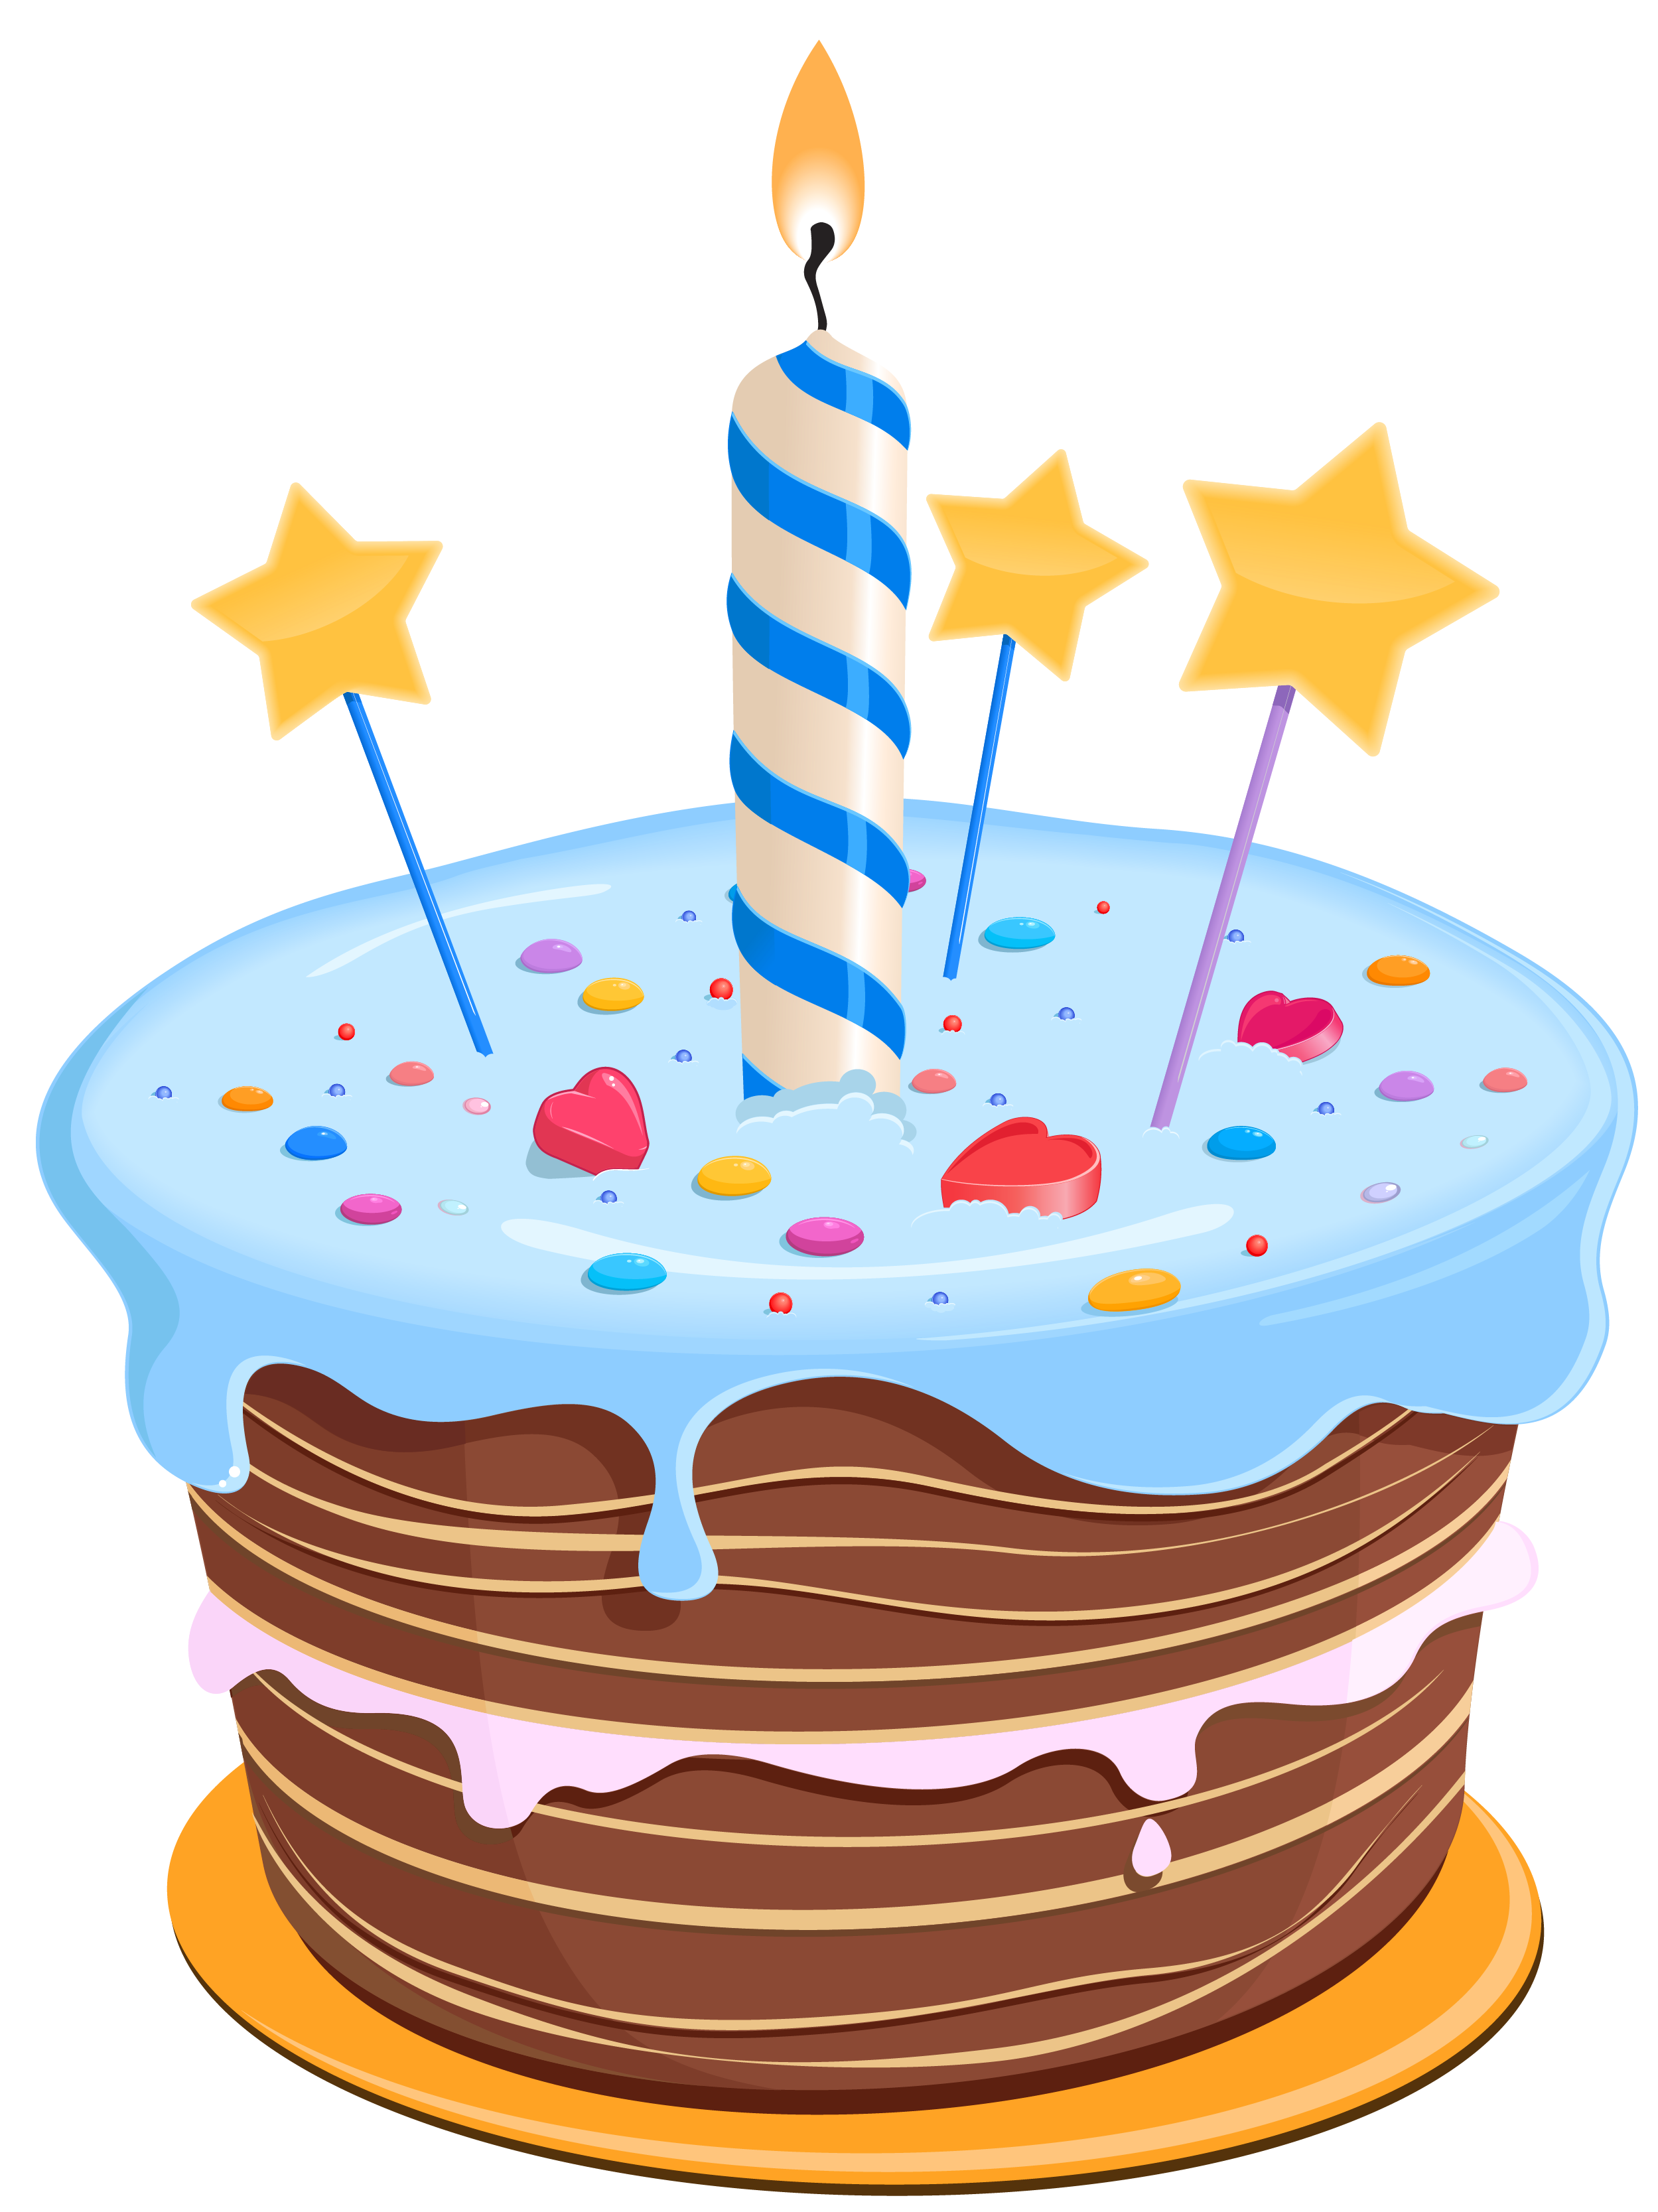 Set these cute as. August clipart birthday cake